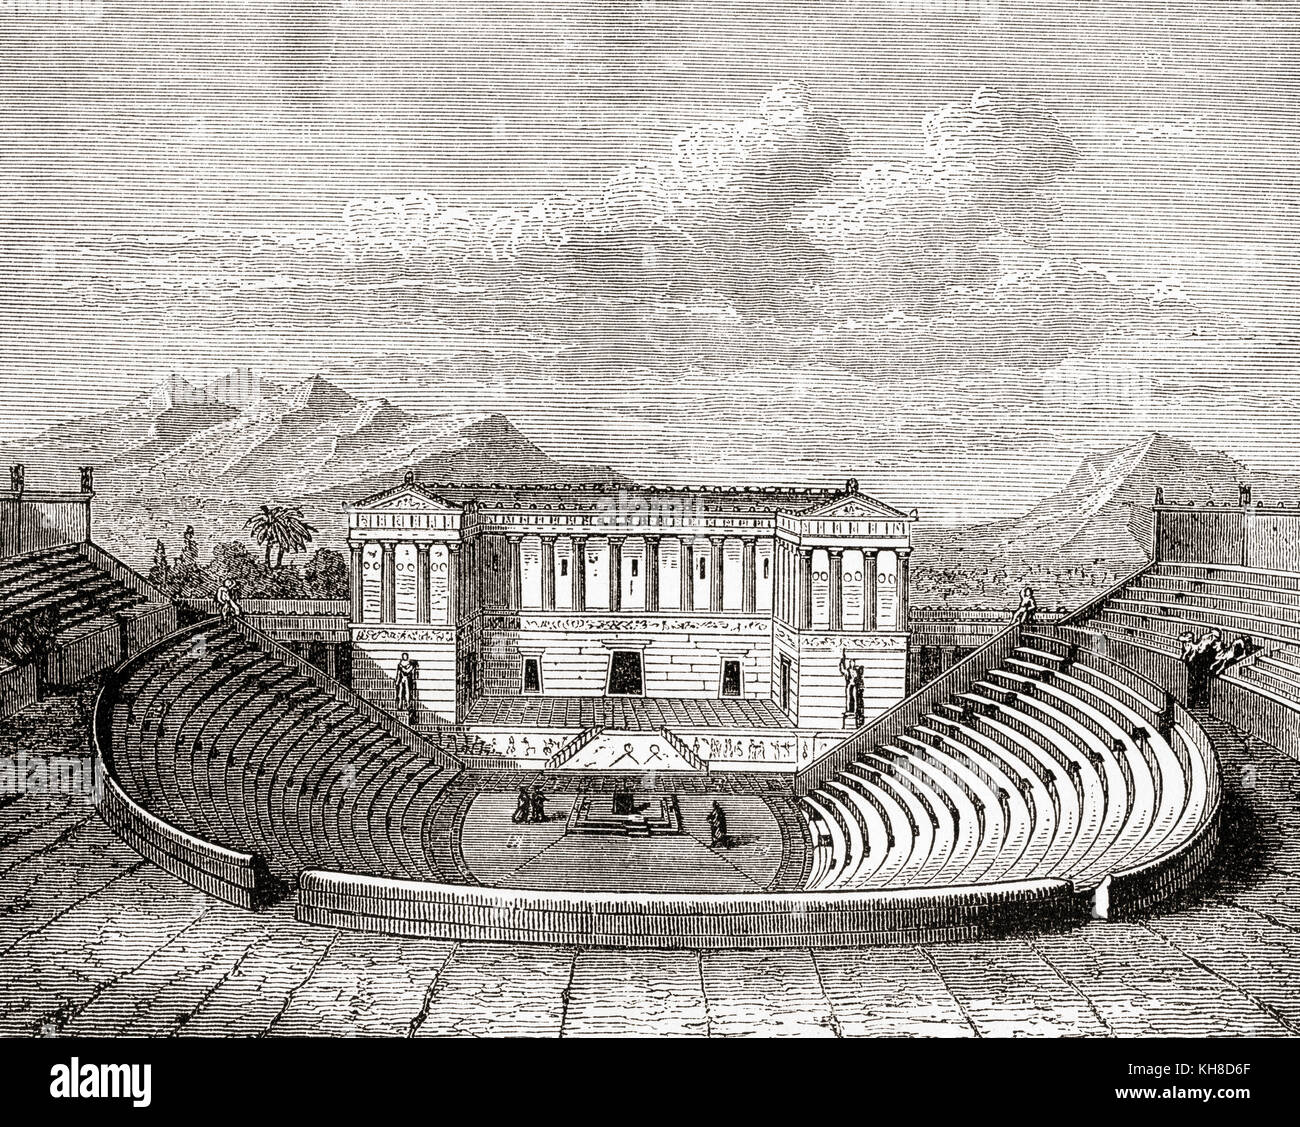 The ancient Greek theatre at Segesta, Sicily, Italy.  From Ward and Lock's Illustrated History of the World, published c.1882. Stock Photo